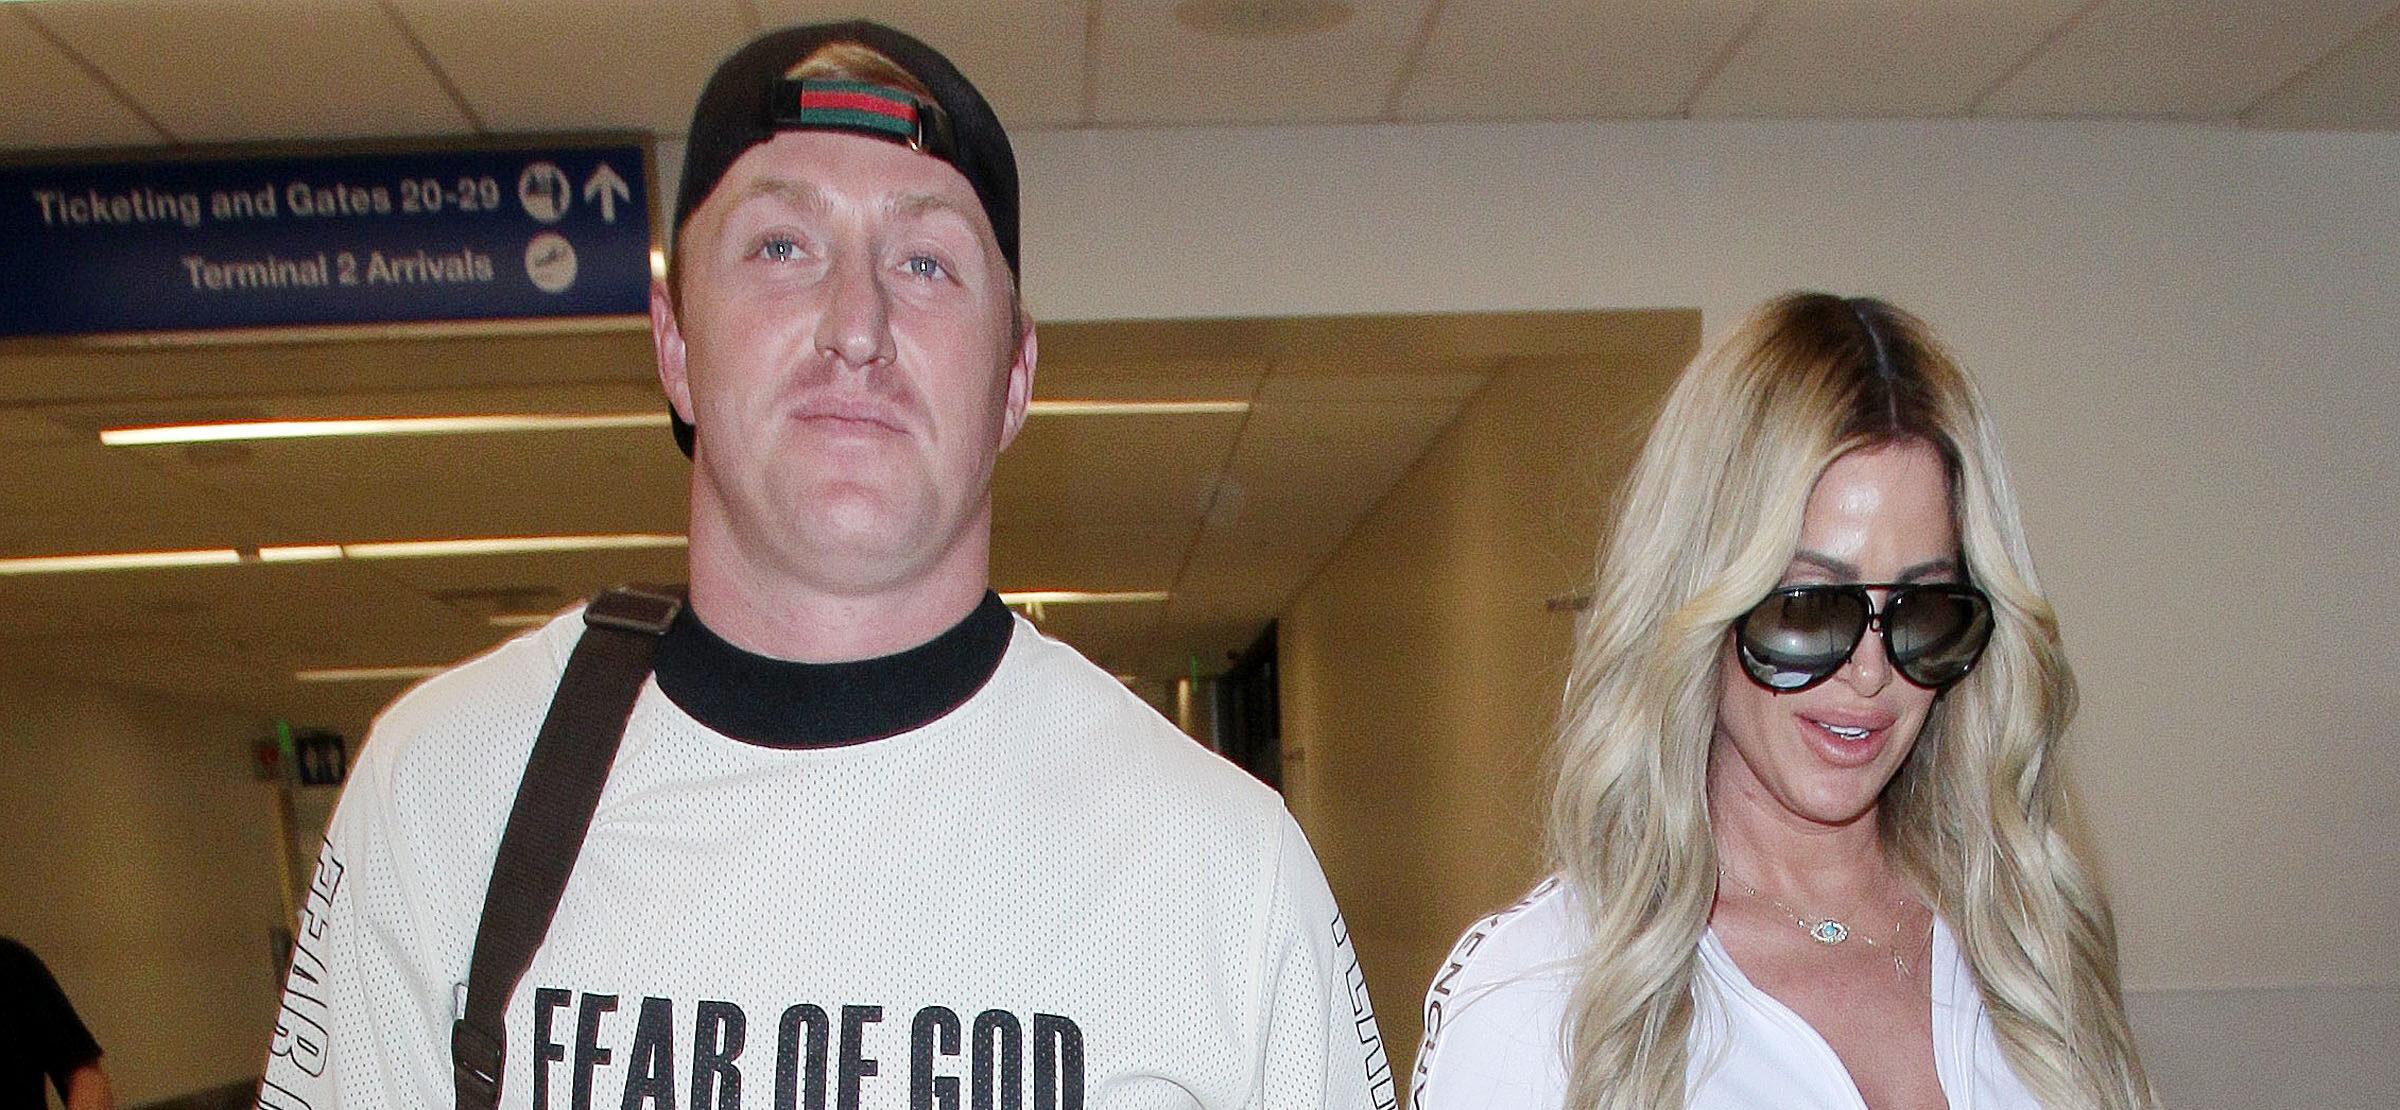 Kim Zolciak Is Officially A Biermann Again, Changes IG Profile Back To Married Name!